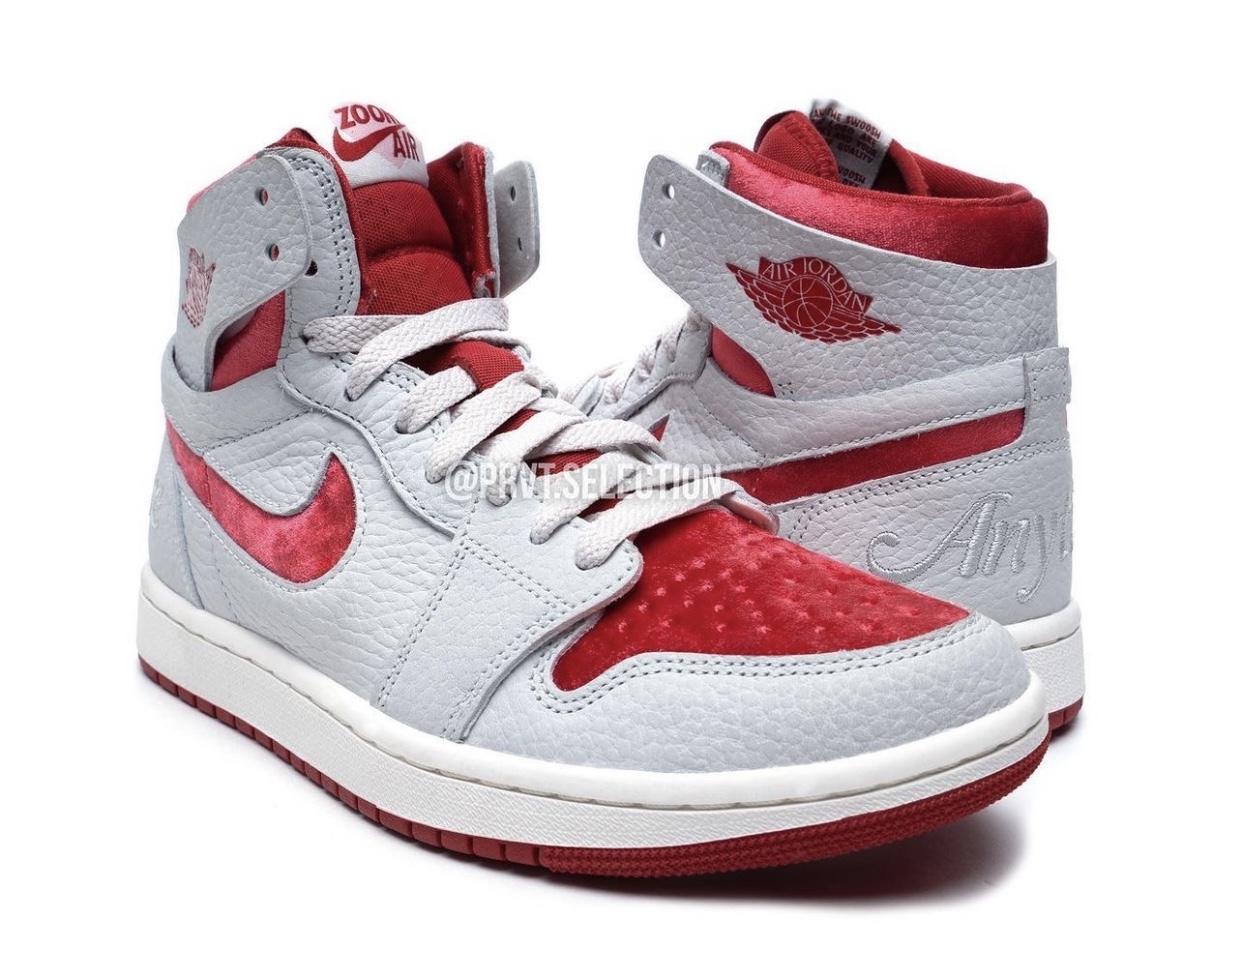 Air Jordan 1 High Zoom CMFT 2 Valentines Day Anytime Anywhere Release Date